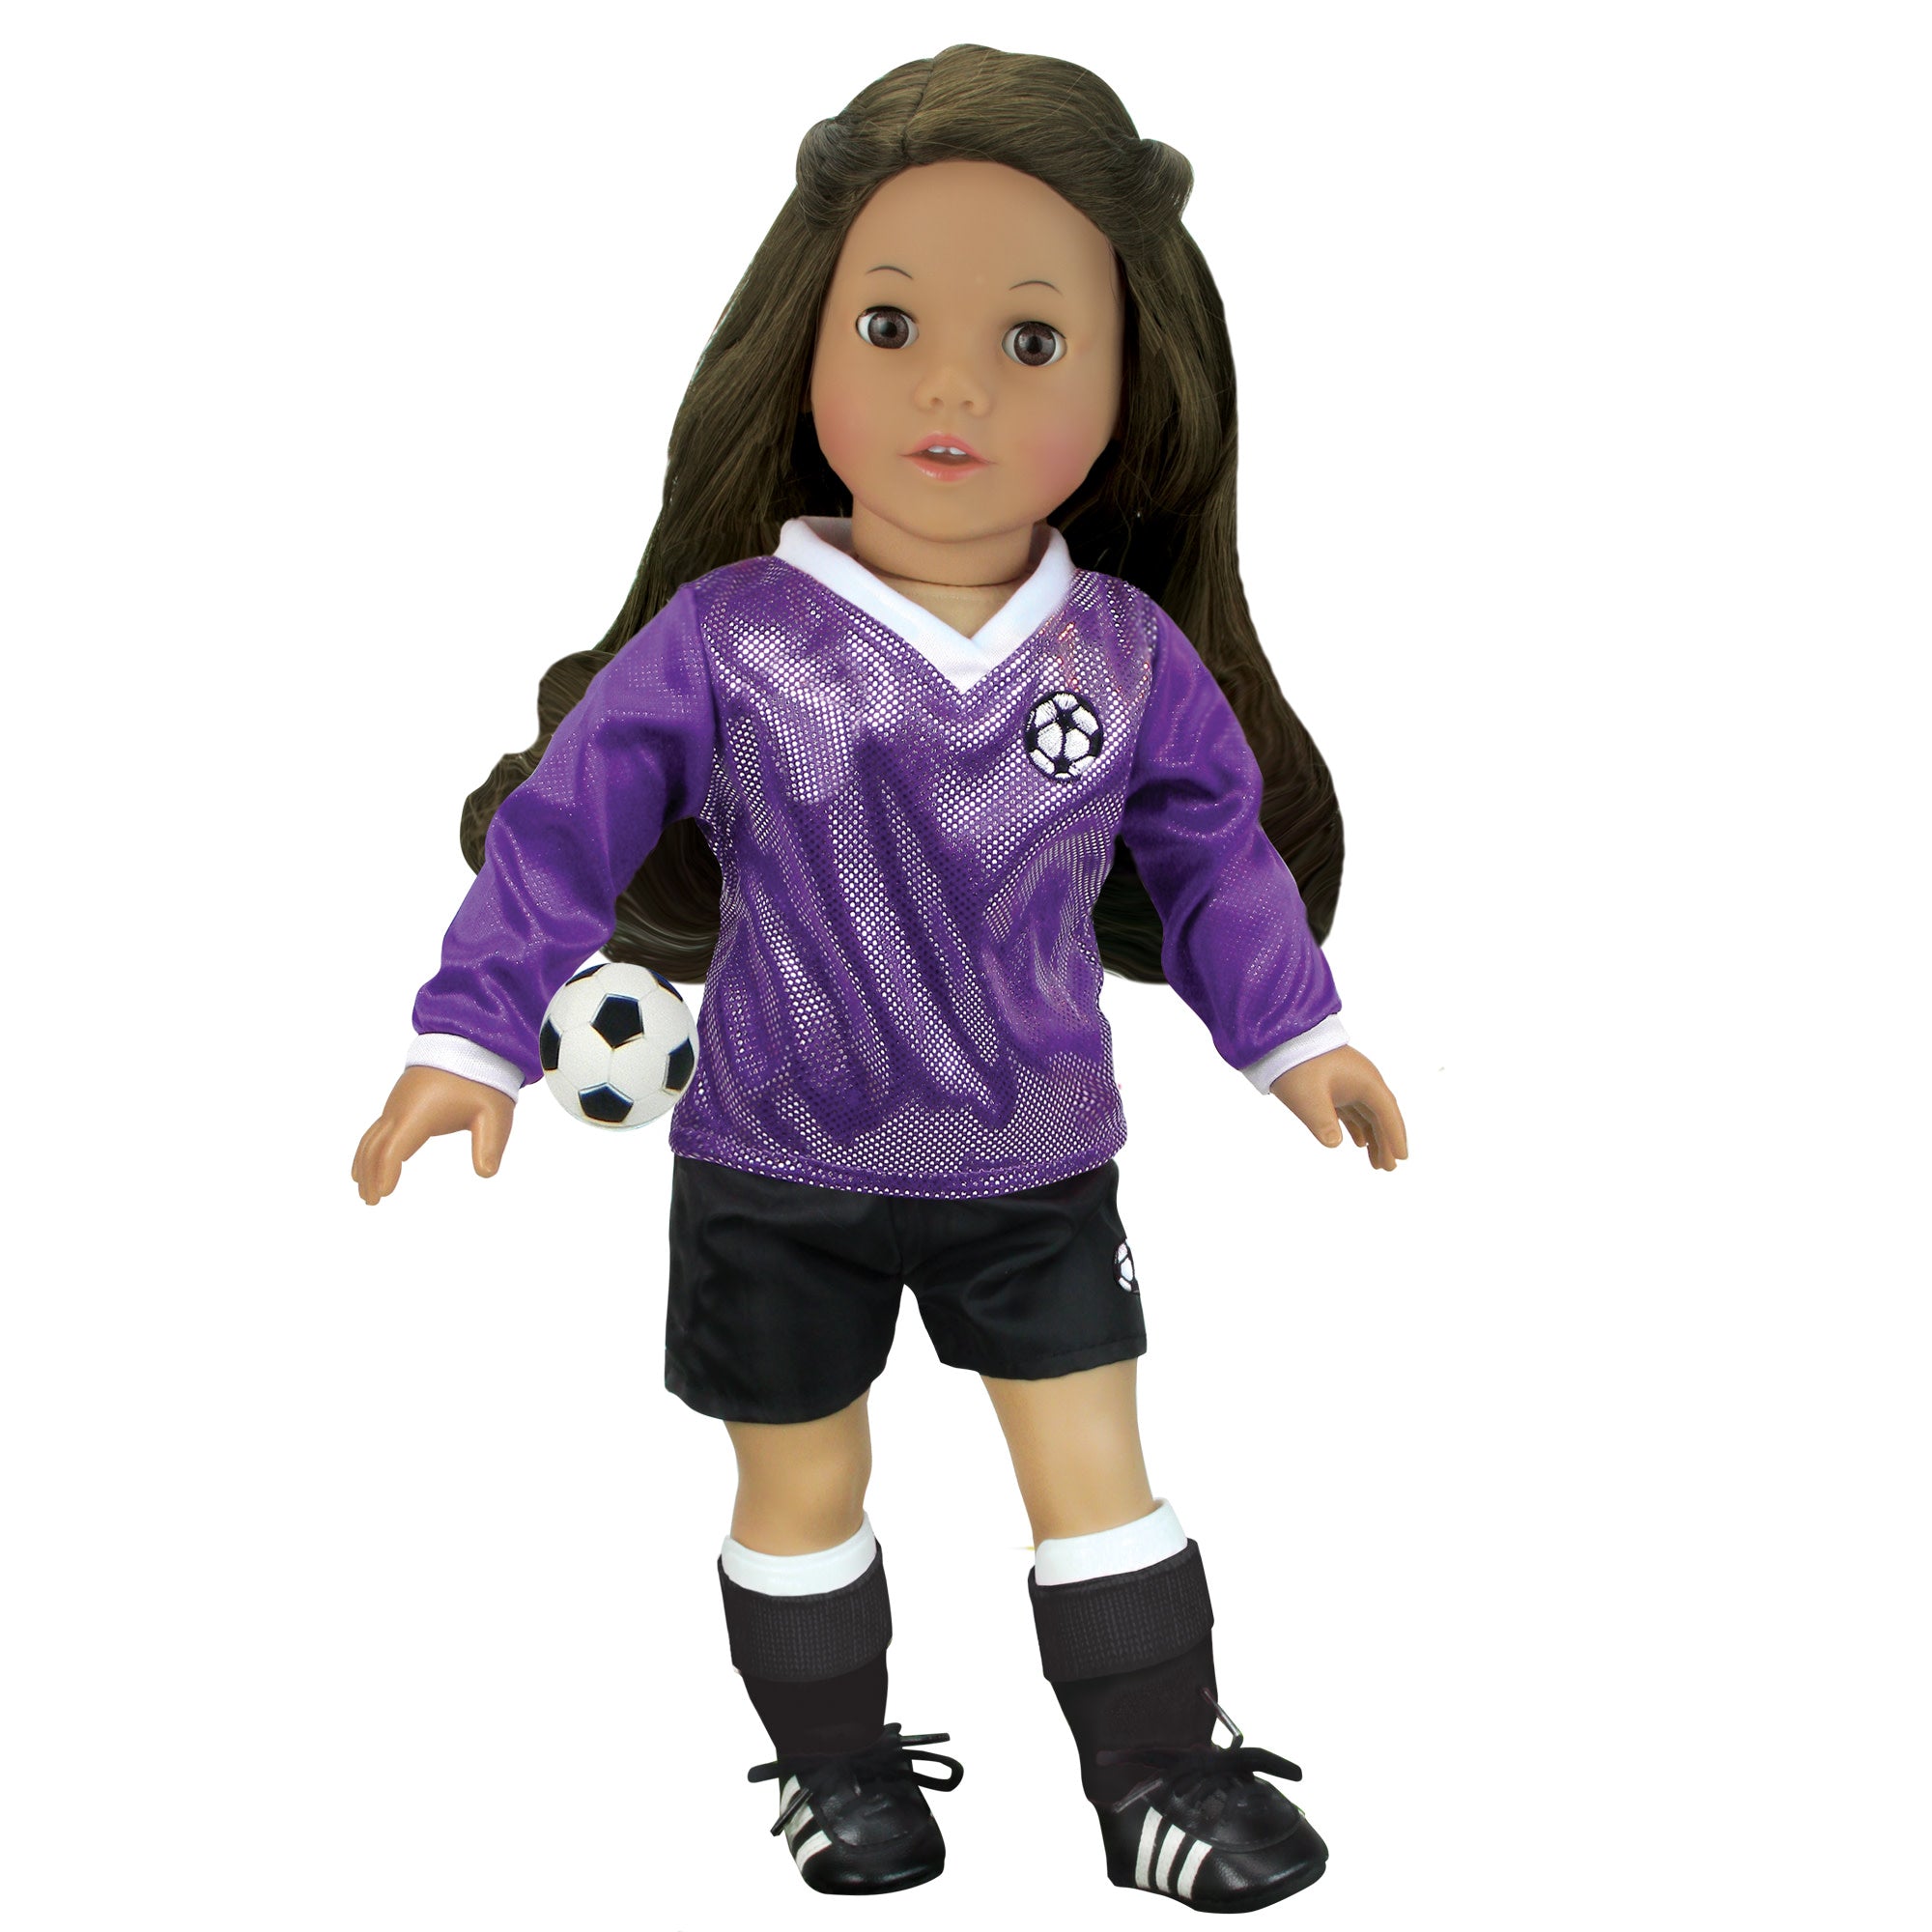 Sophia’s Doll Soccer Outfit 6-Piece Set with Ball for 18" Dolls